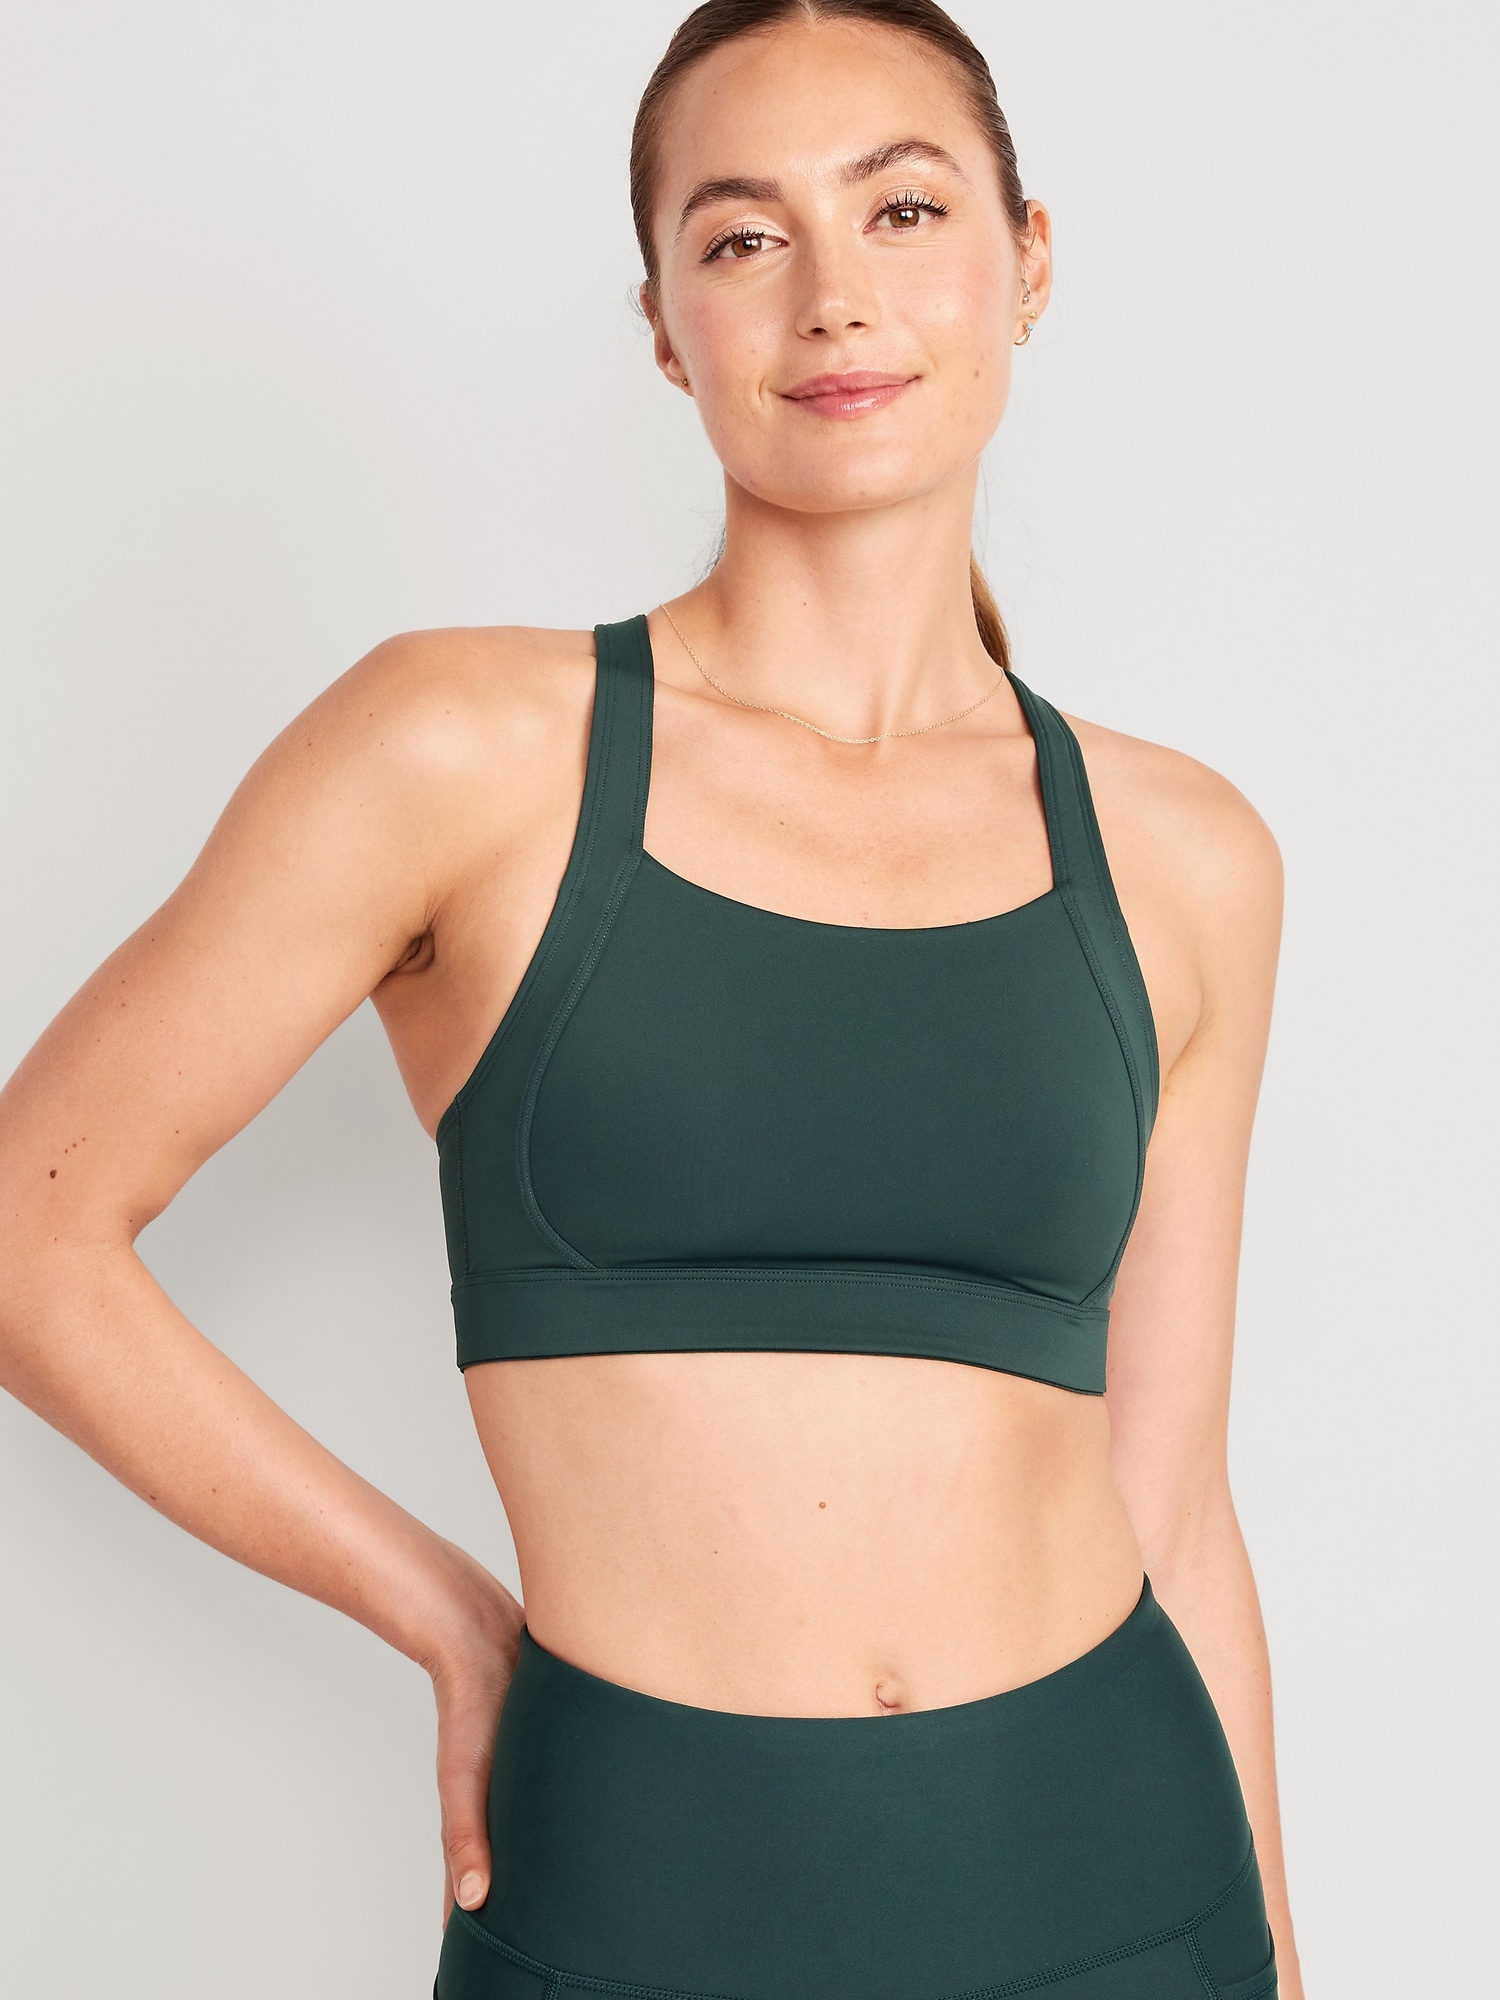 Vedolay Sports Bras Sports Bra for Women with Sewn-in Pads, High